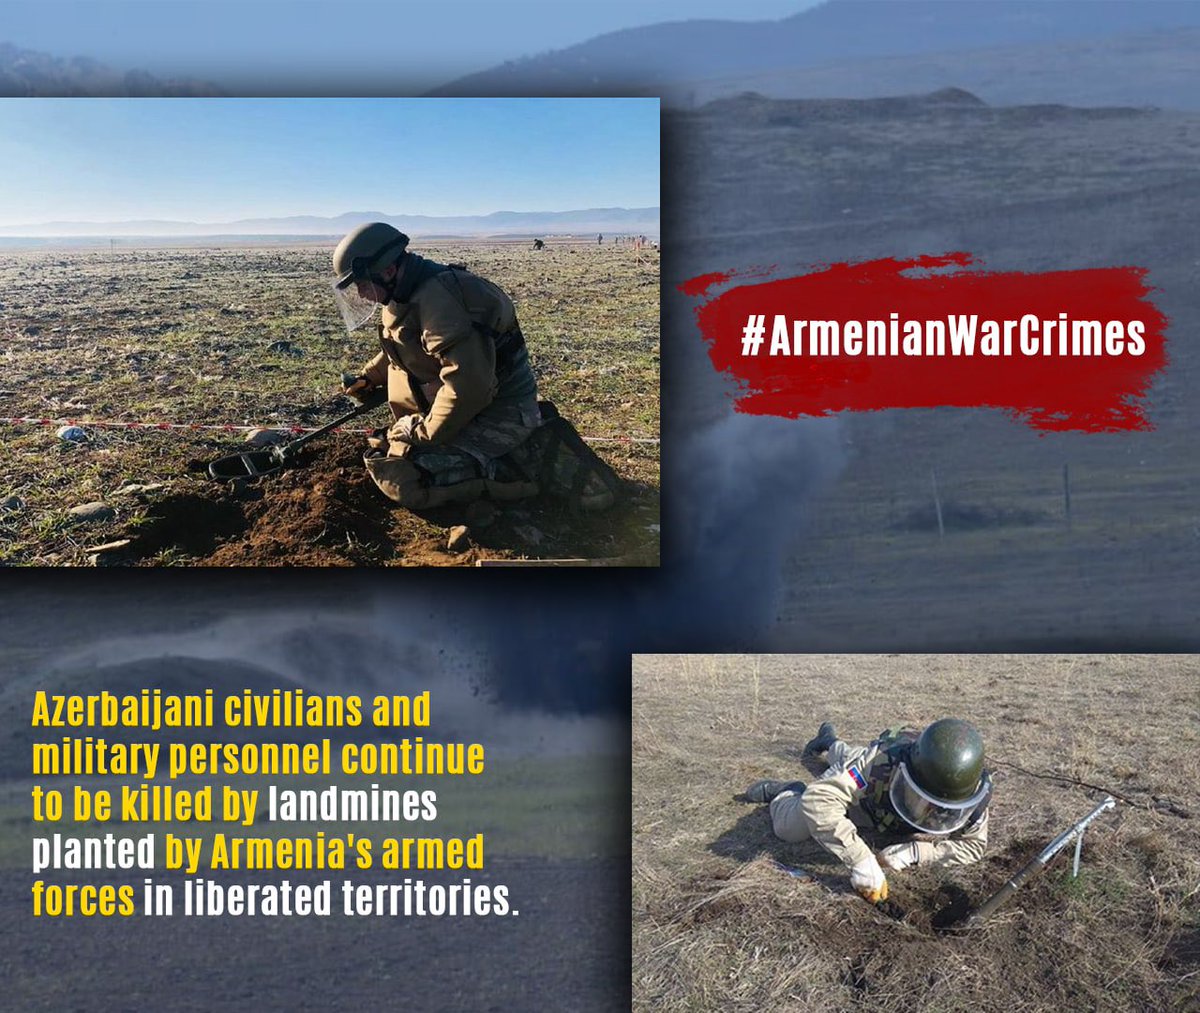 🚨 For 30 years, our lands were hidden battlefields, filled with millions of silent threats by #Armenia. #Landmines, left by the occupation, continue to claim innocent lives in #Azerbaijan. 
❗️Each step in our soil must be a step towards #peace, not peril. #MineAwarenessDay